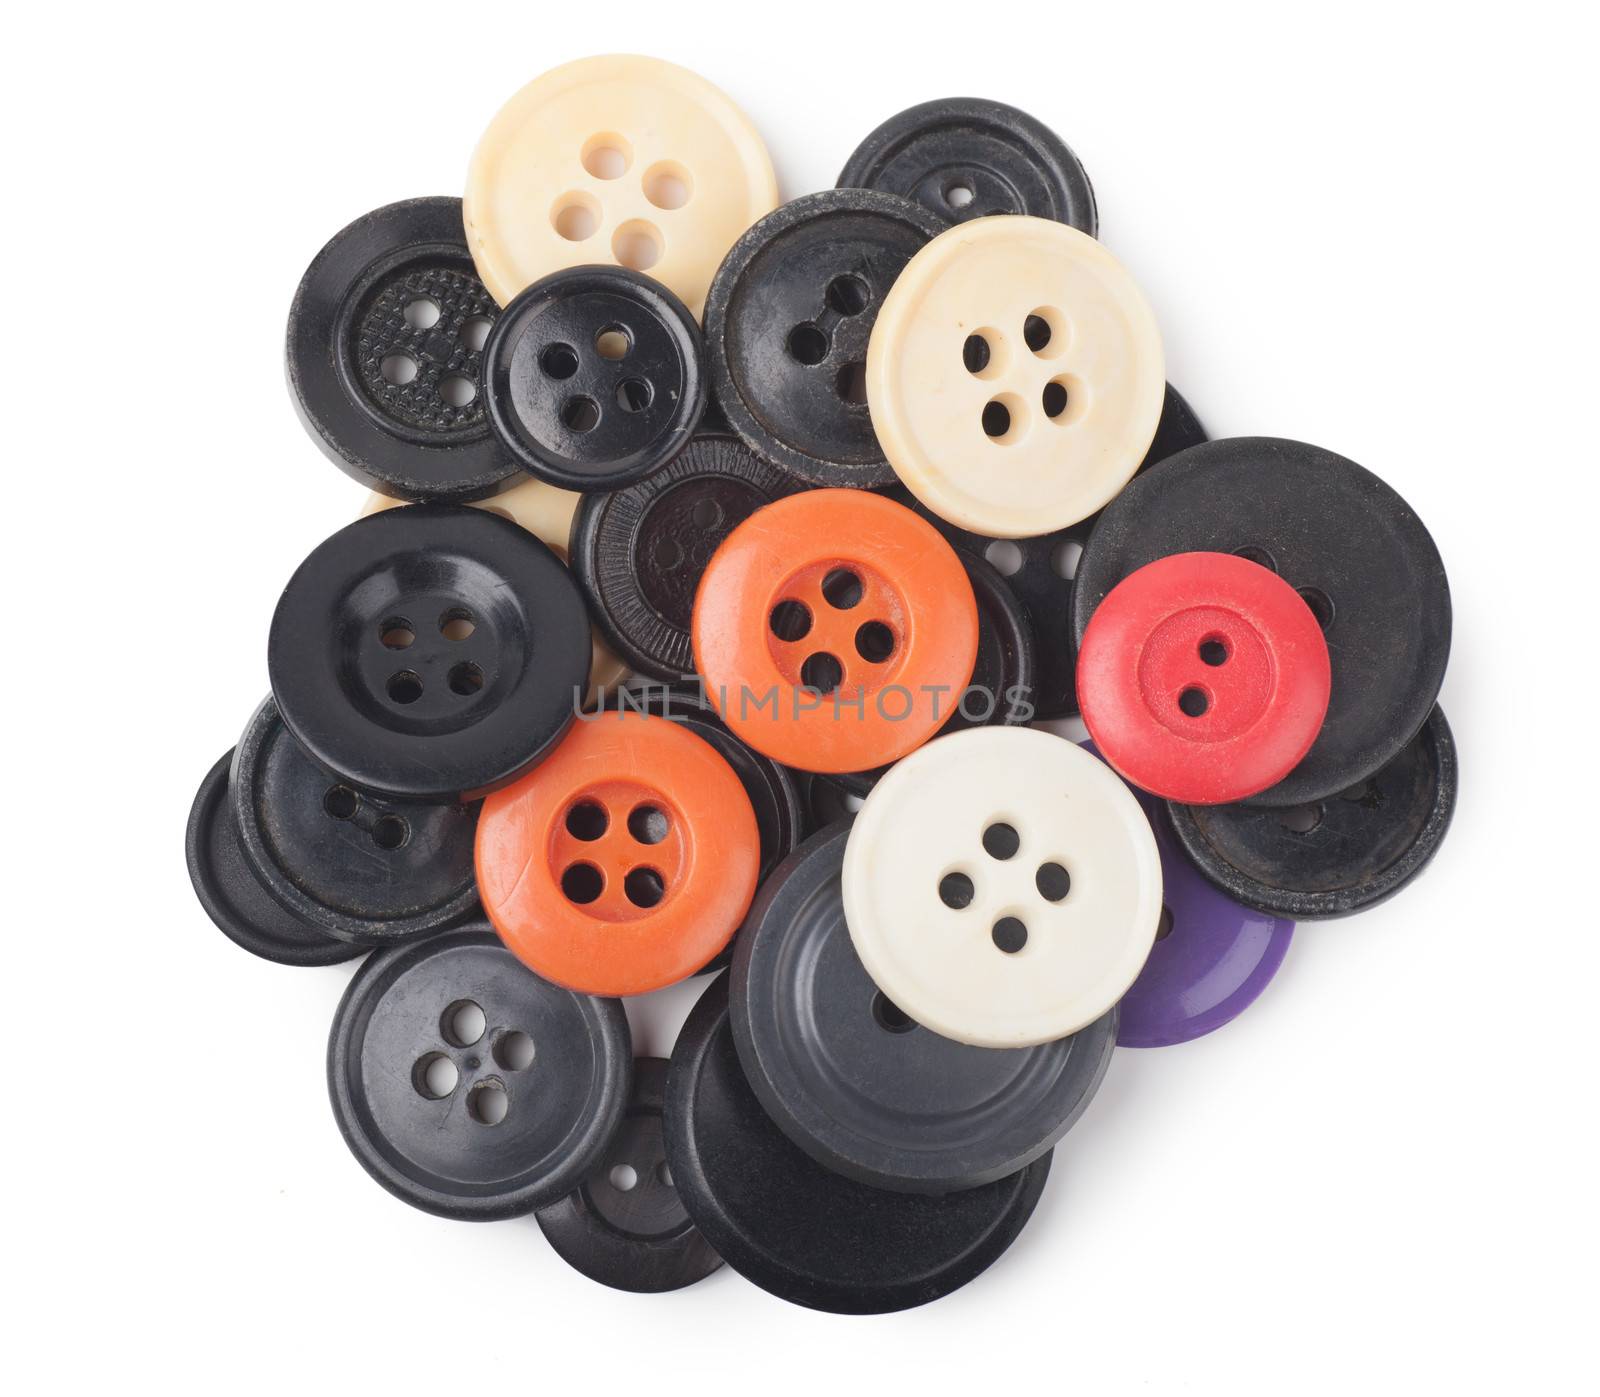 Buttons by AGorohov